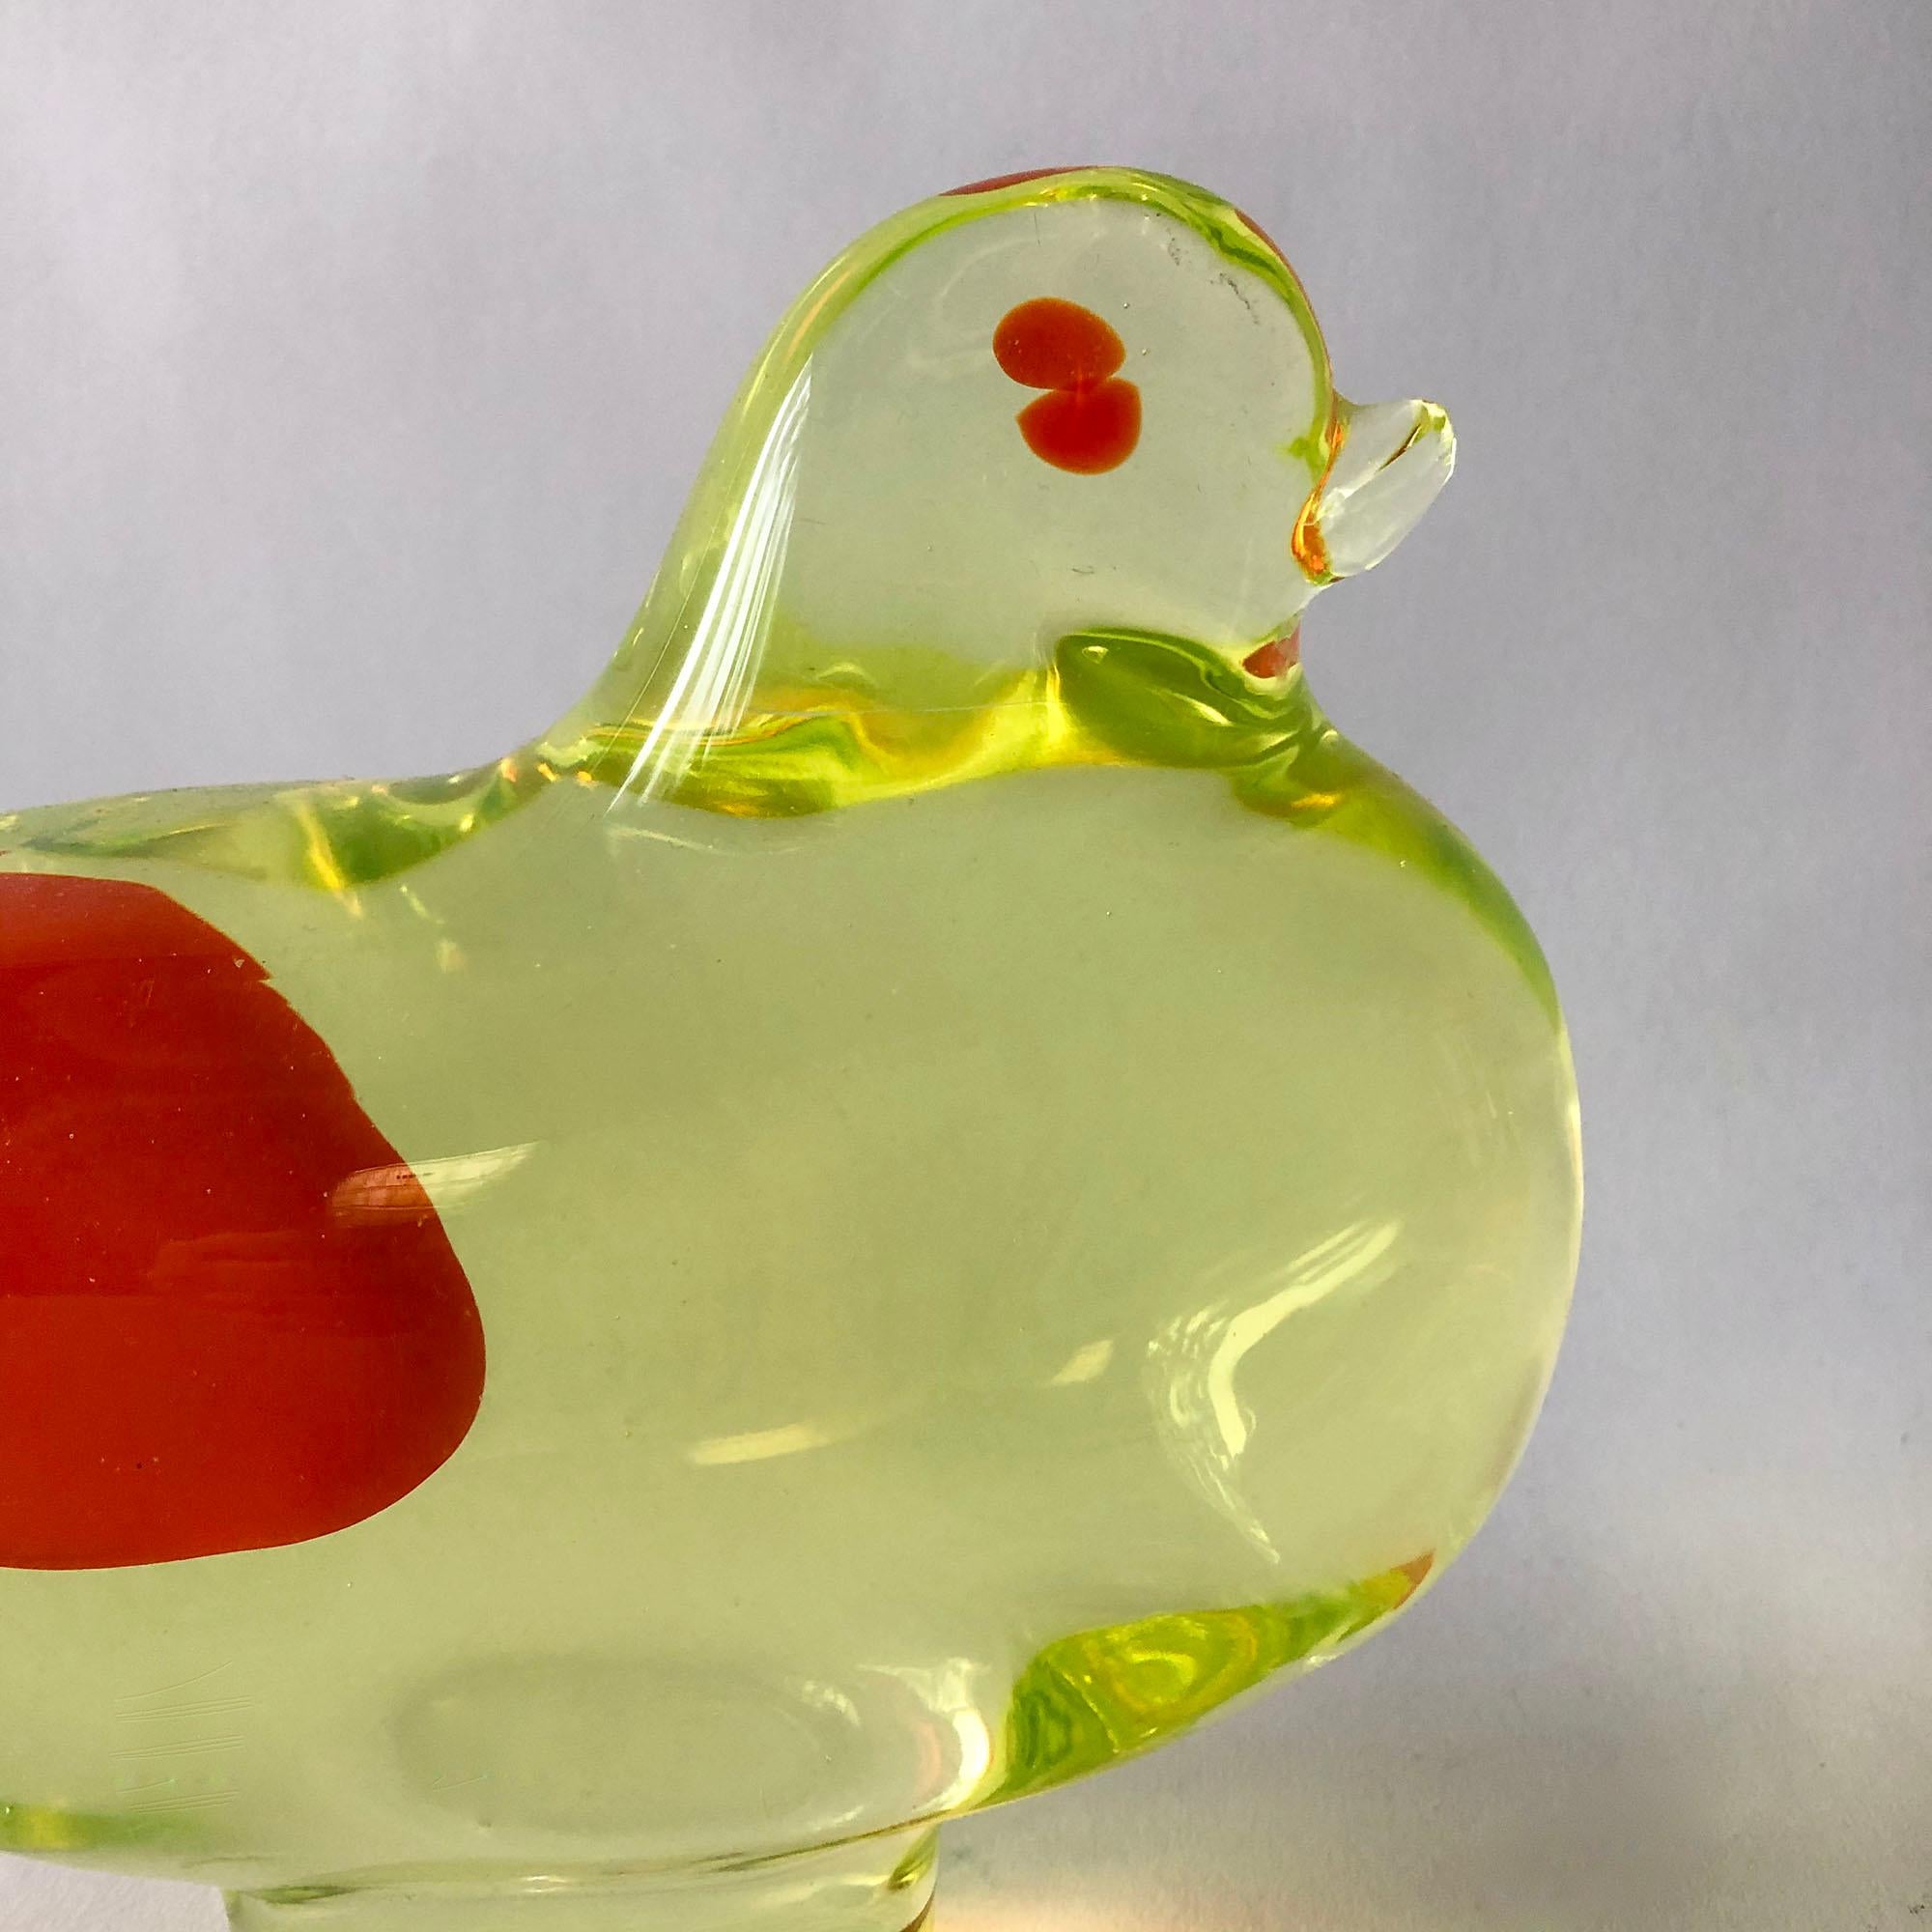 1950s Italian modernist glass bird sculpture by Antonio da Ros for Cenedese, Italy. Bird does have an altered beak which was broken at one time, then ground down and polished somewhat square. Piece does display well despite the imperfection. It